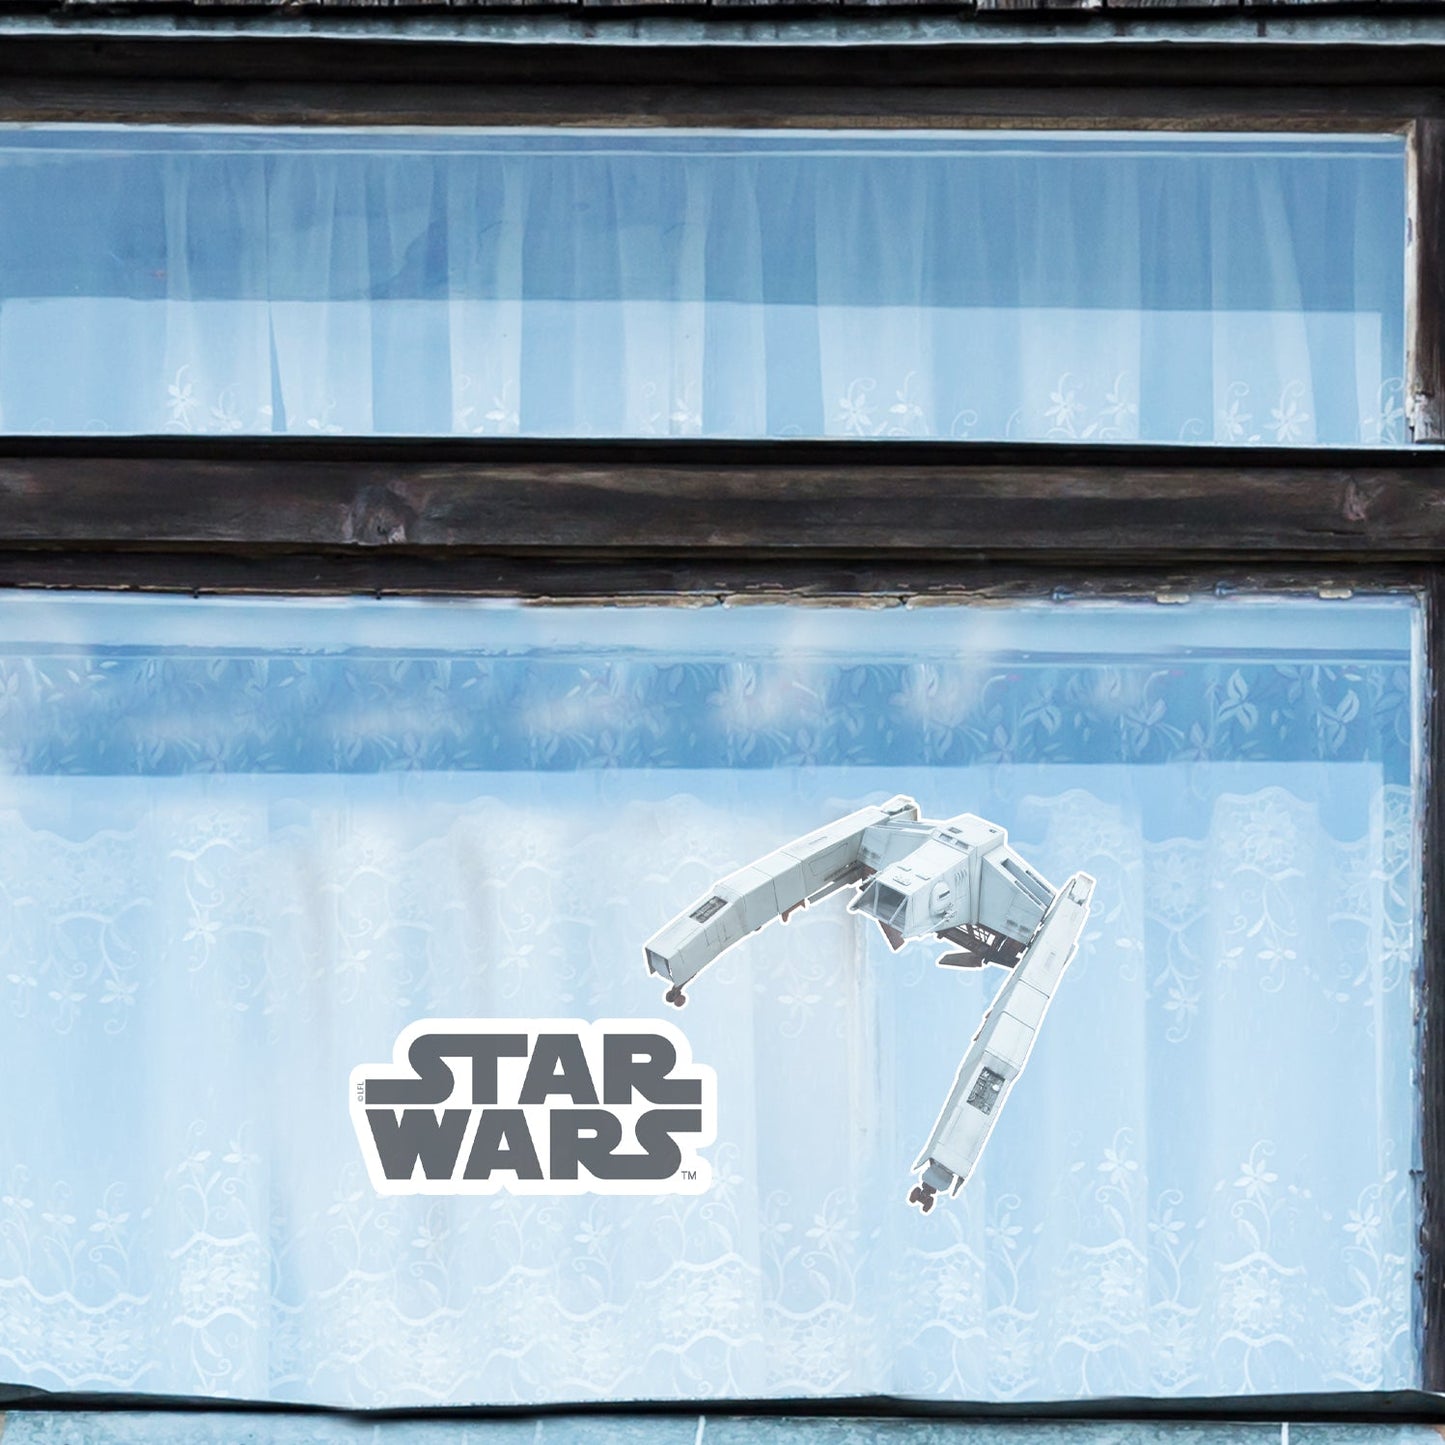 Star Wars: AT-Hauler Window Clings - Officially Licensed Disney Removable Window Static Decal